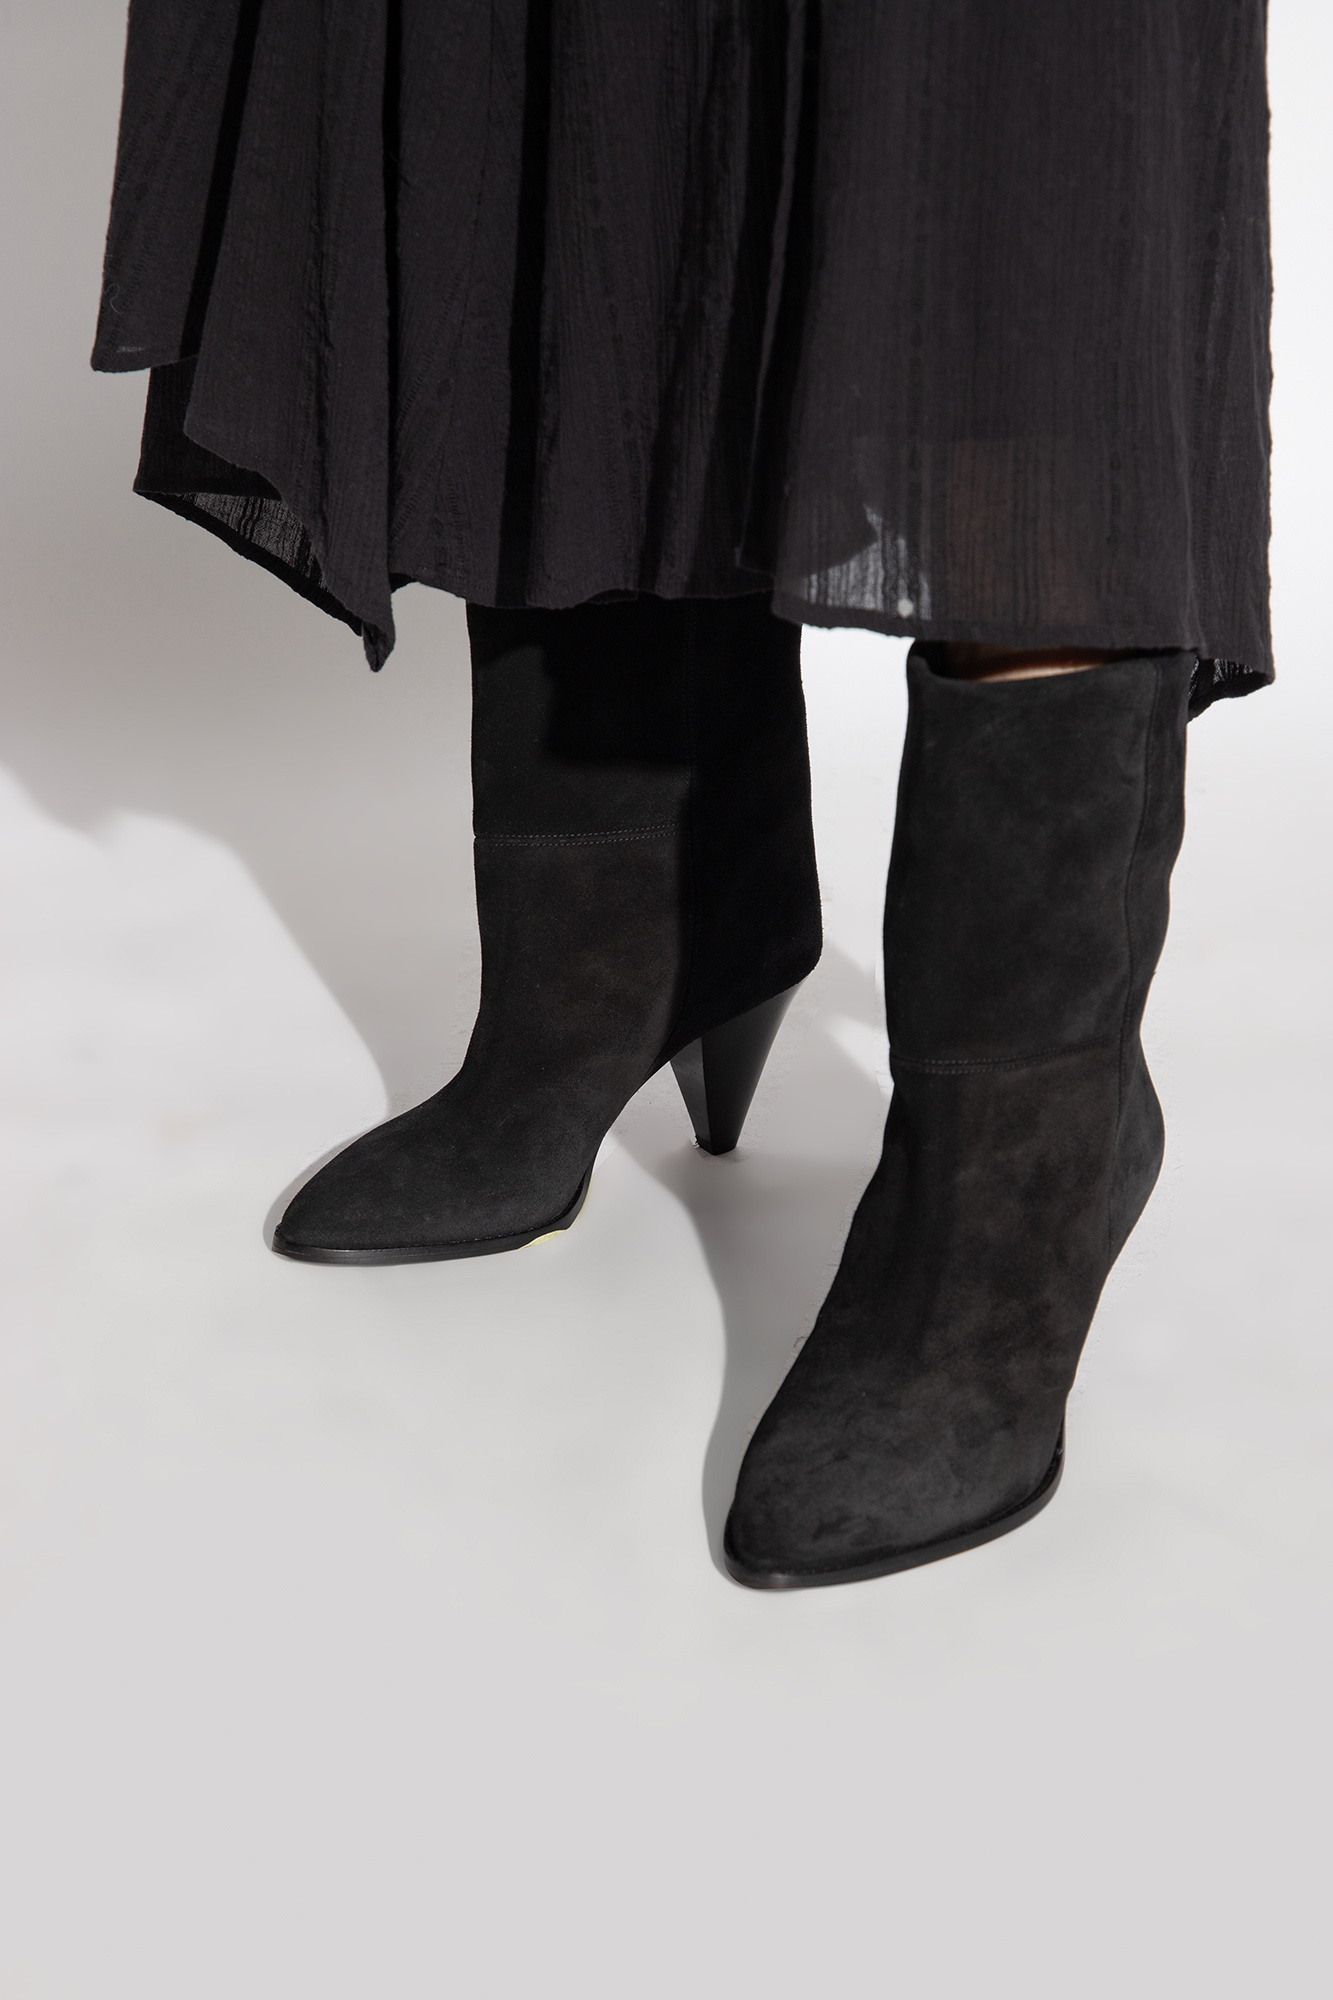 Isabel Marant ‘Rouxa’ suede heeled ankle boots